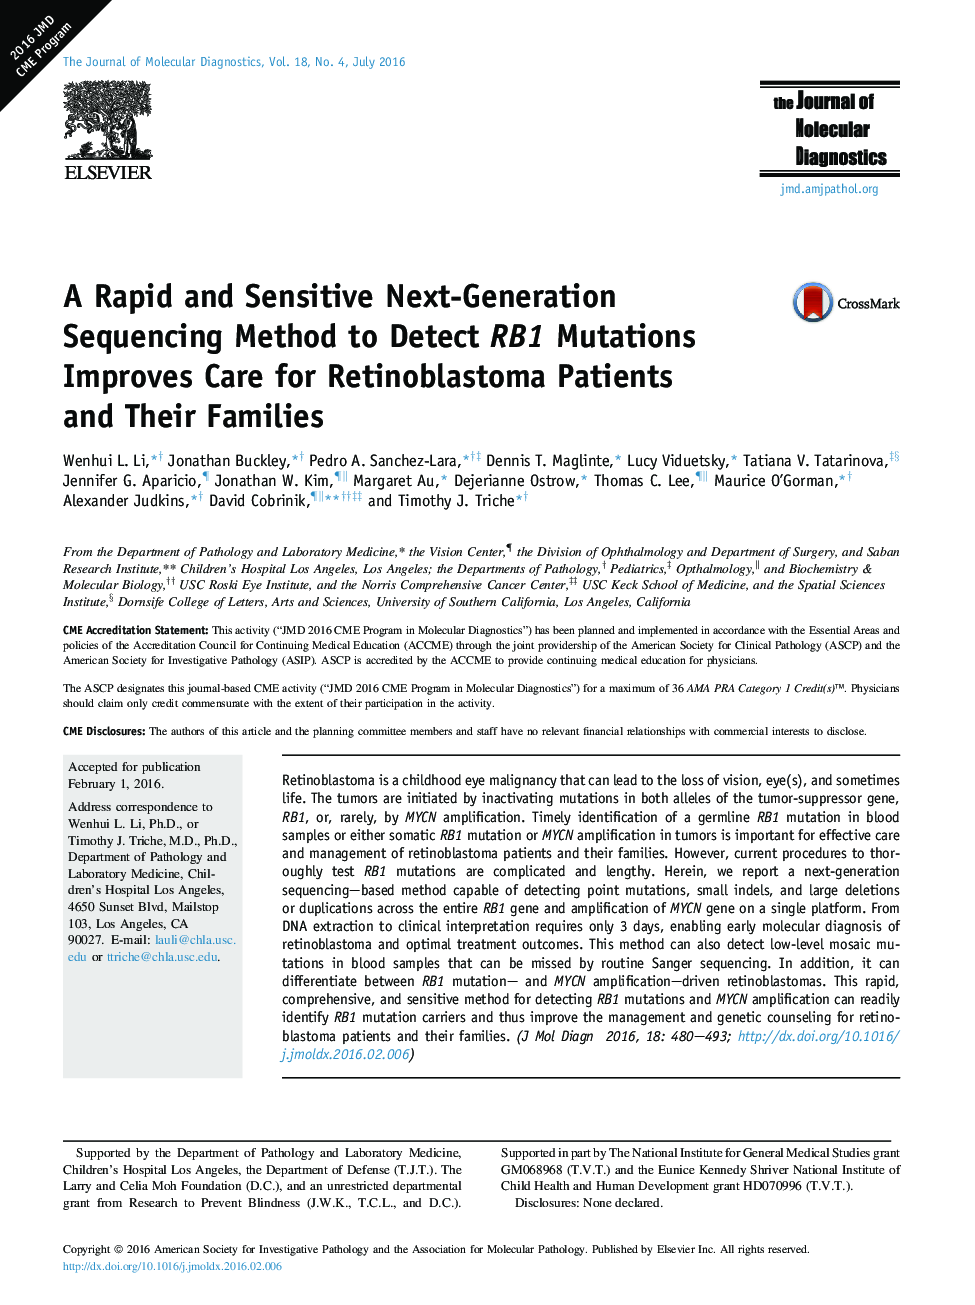 Regular articleA Rapid and Sensitive Next-Generation Sequencing Method to Detect RB1 Mutations Improves Care for Retinoblastoma Patients and Their Families